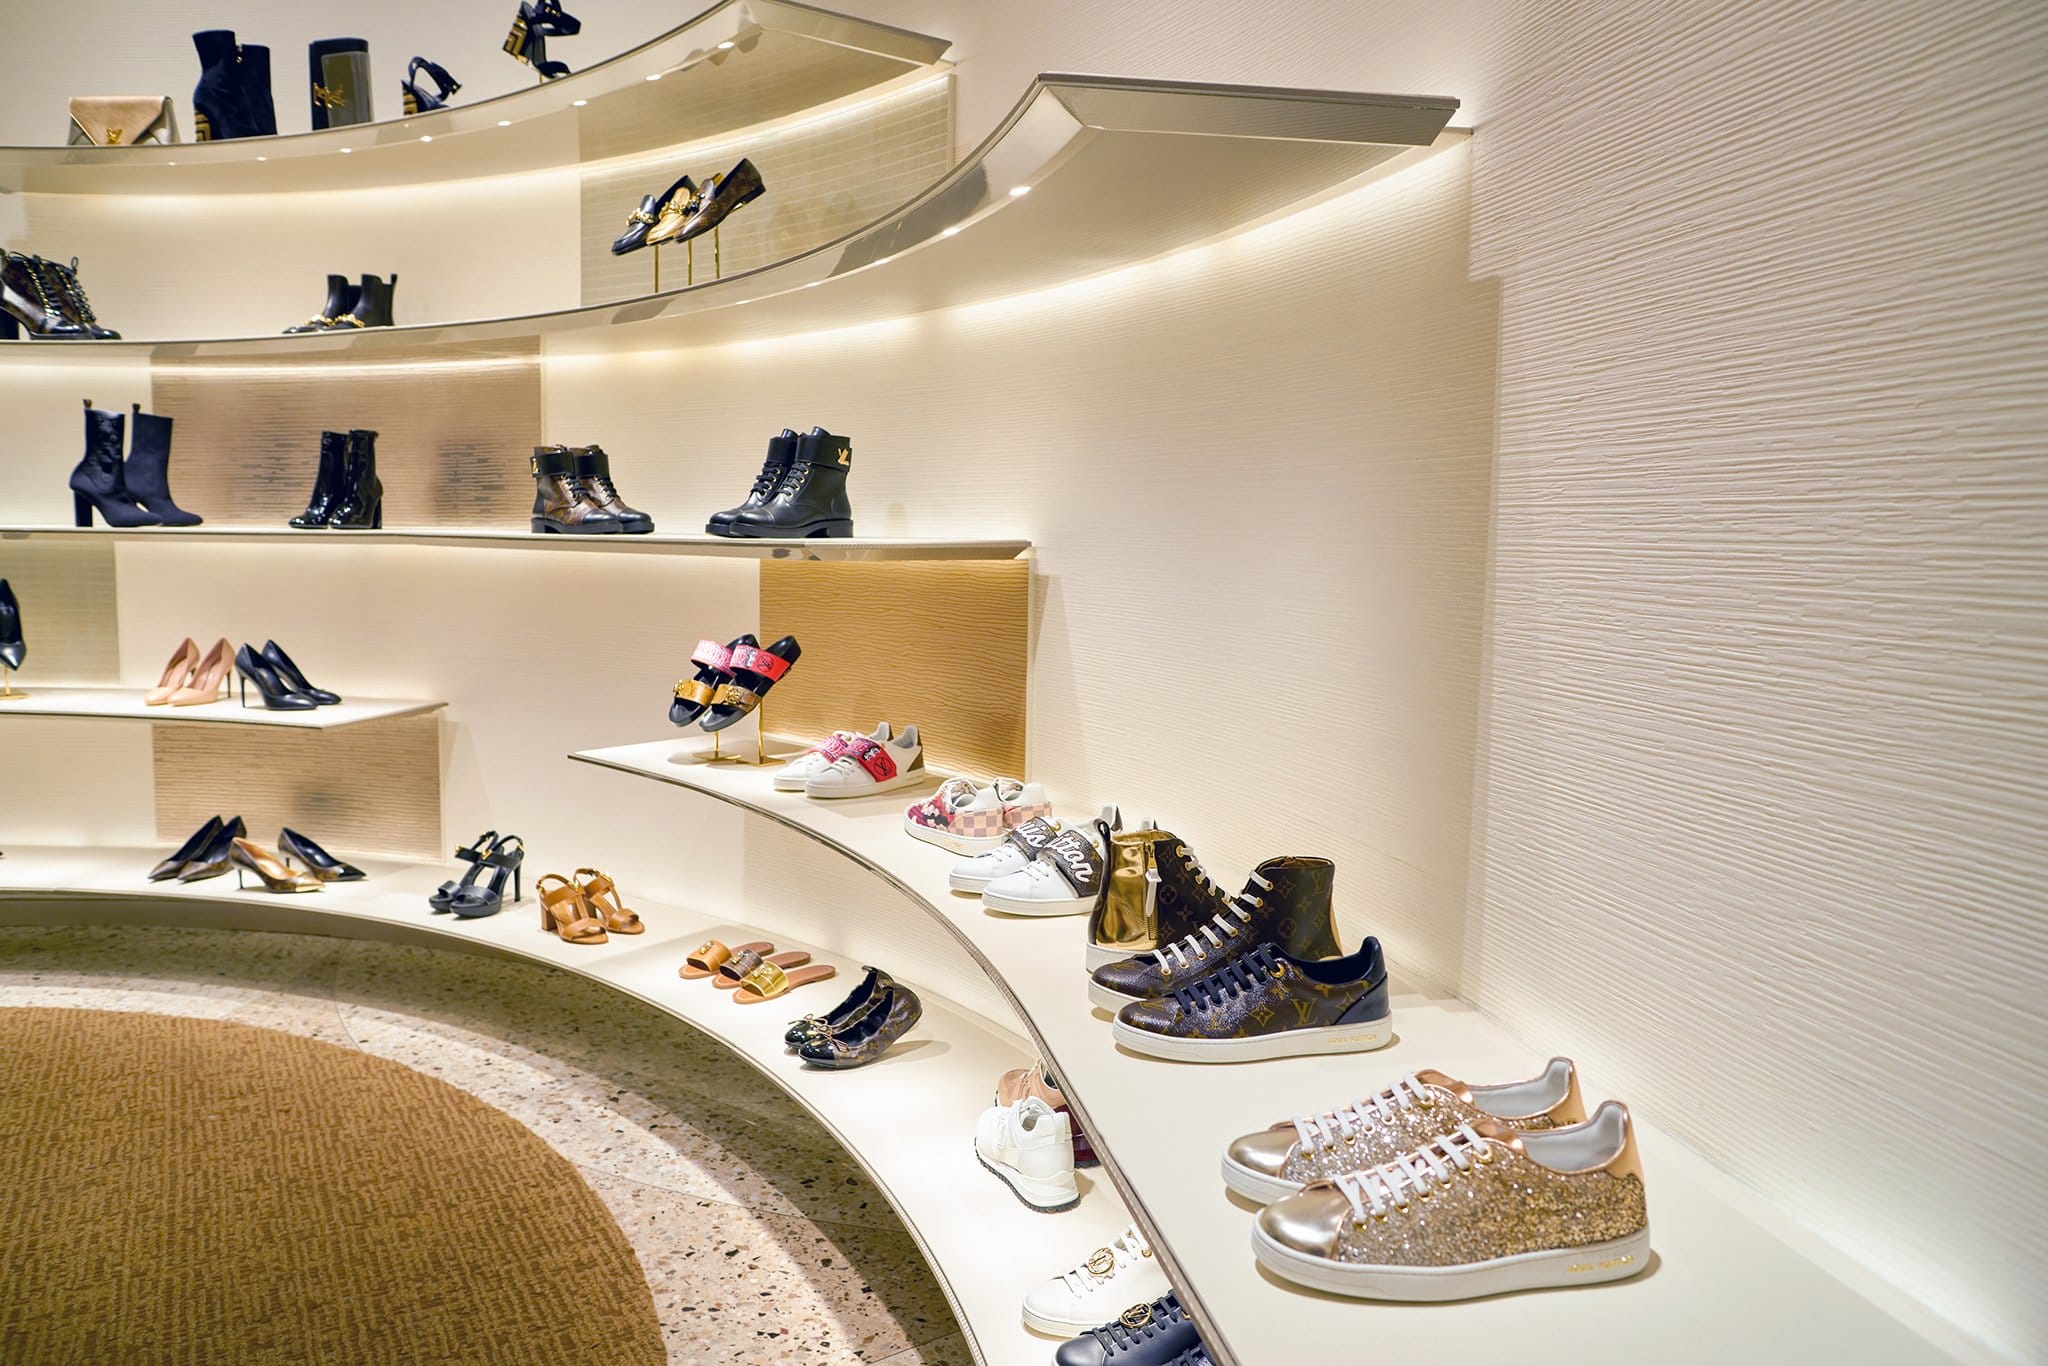 Aside from its leather goods, Louis Vuitton also offers a selection of footwear that can be worn year-round